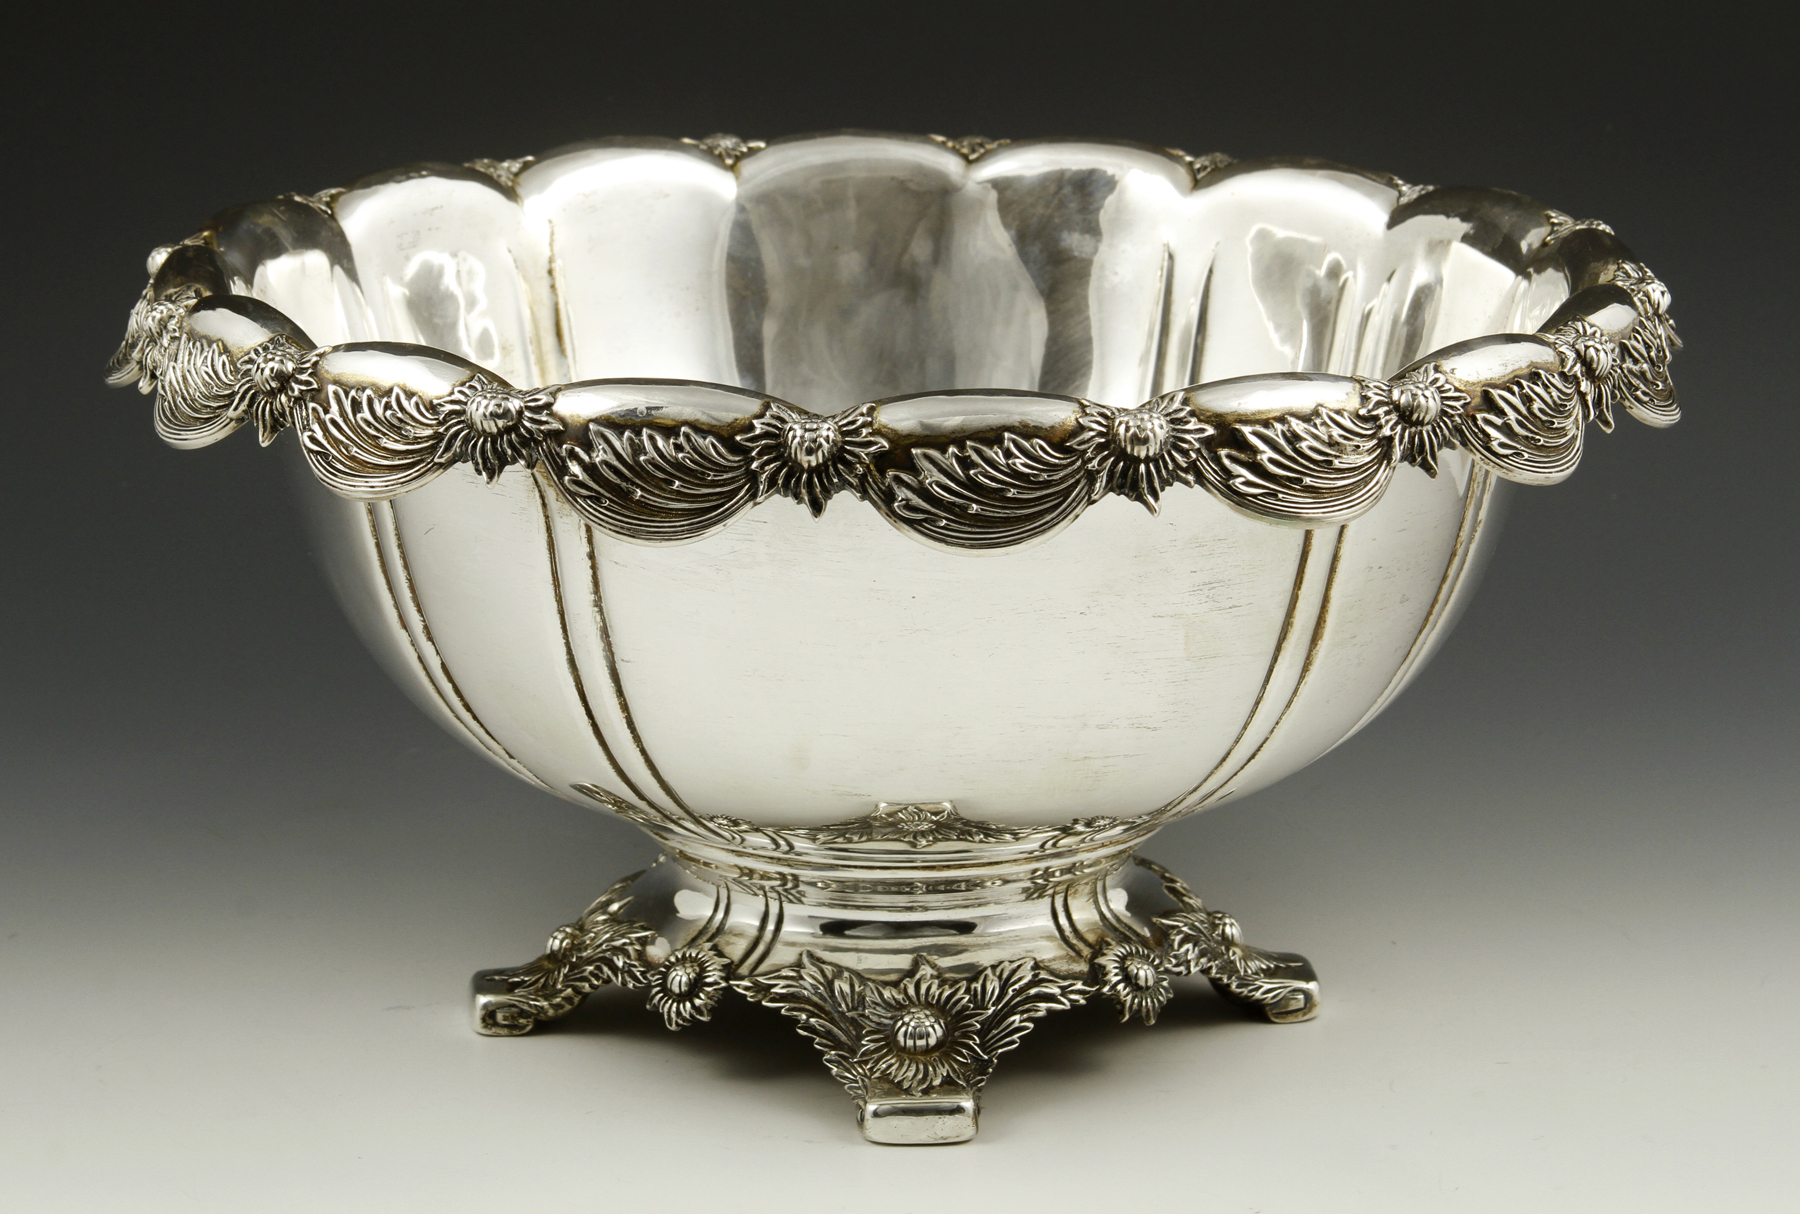 19th C. Tiffany Makers Chrysanthemum Center Bowl, Sterling Silver